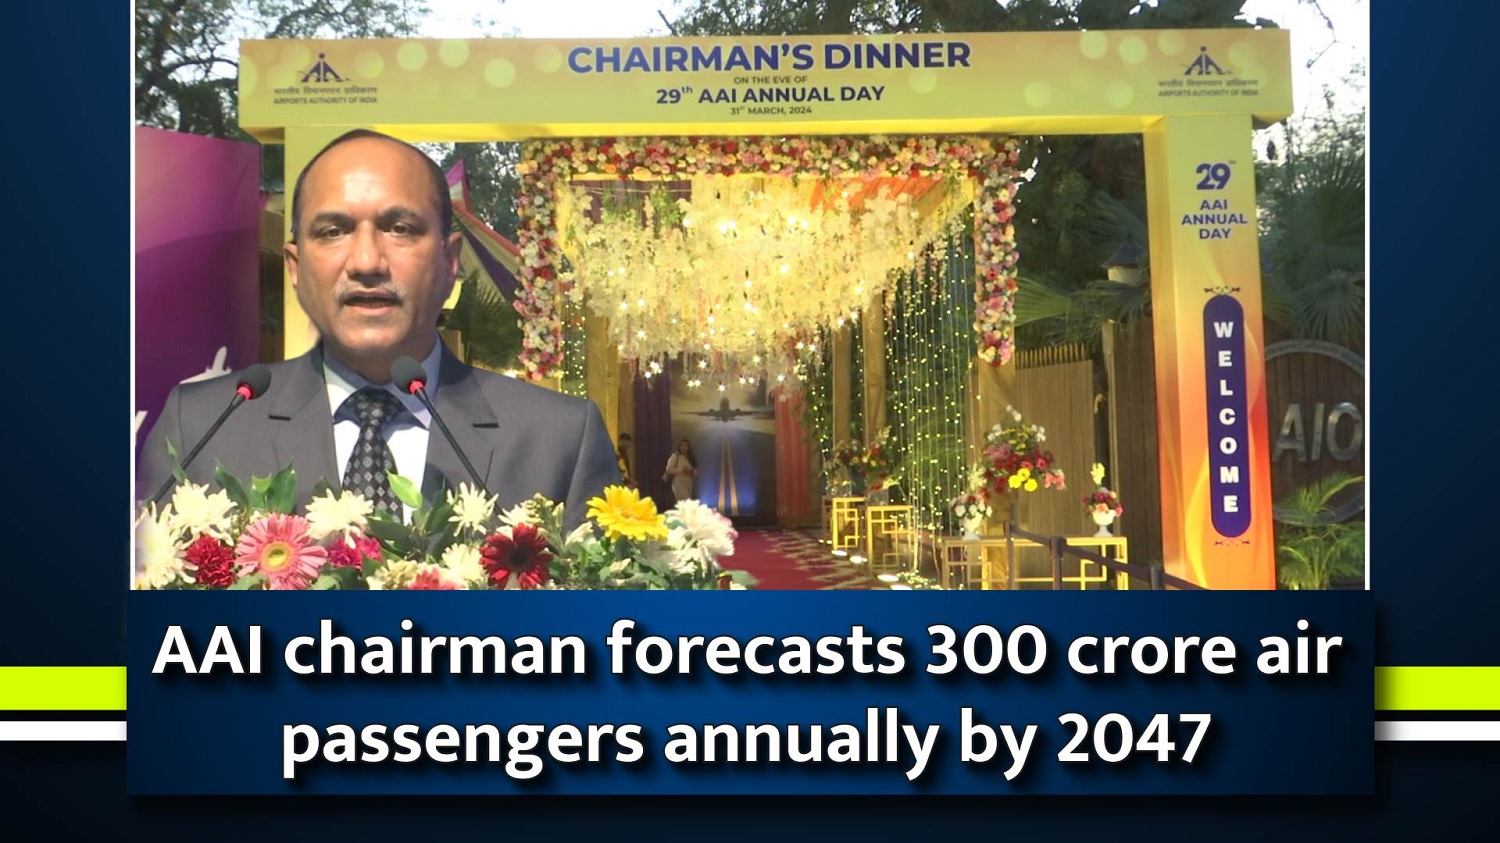 AAI chairman forecasts 300 crore air passengers annually by 2047